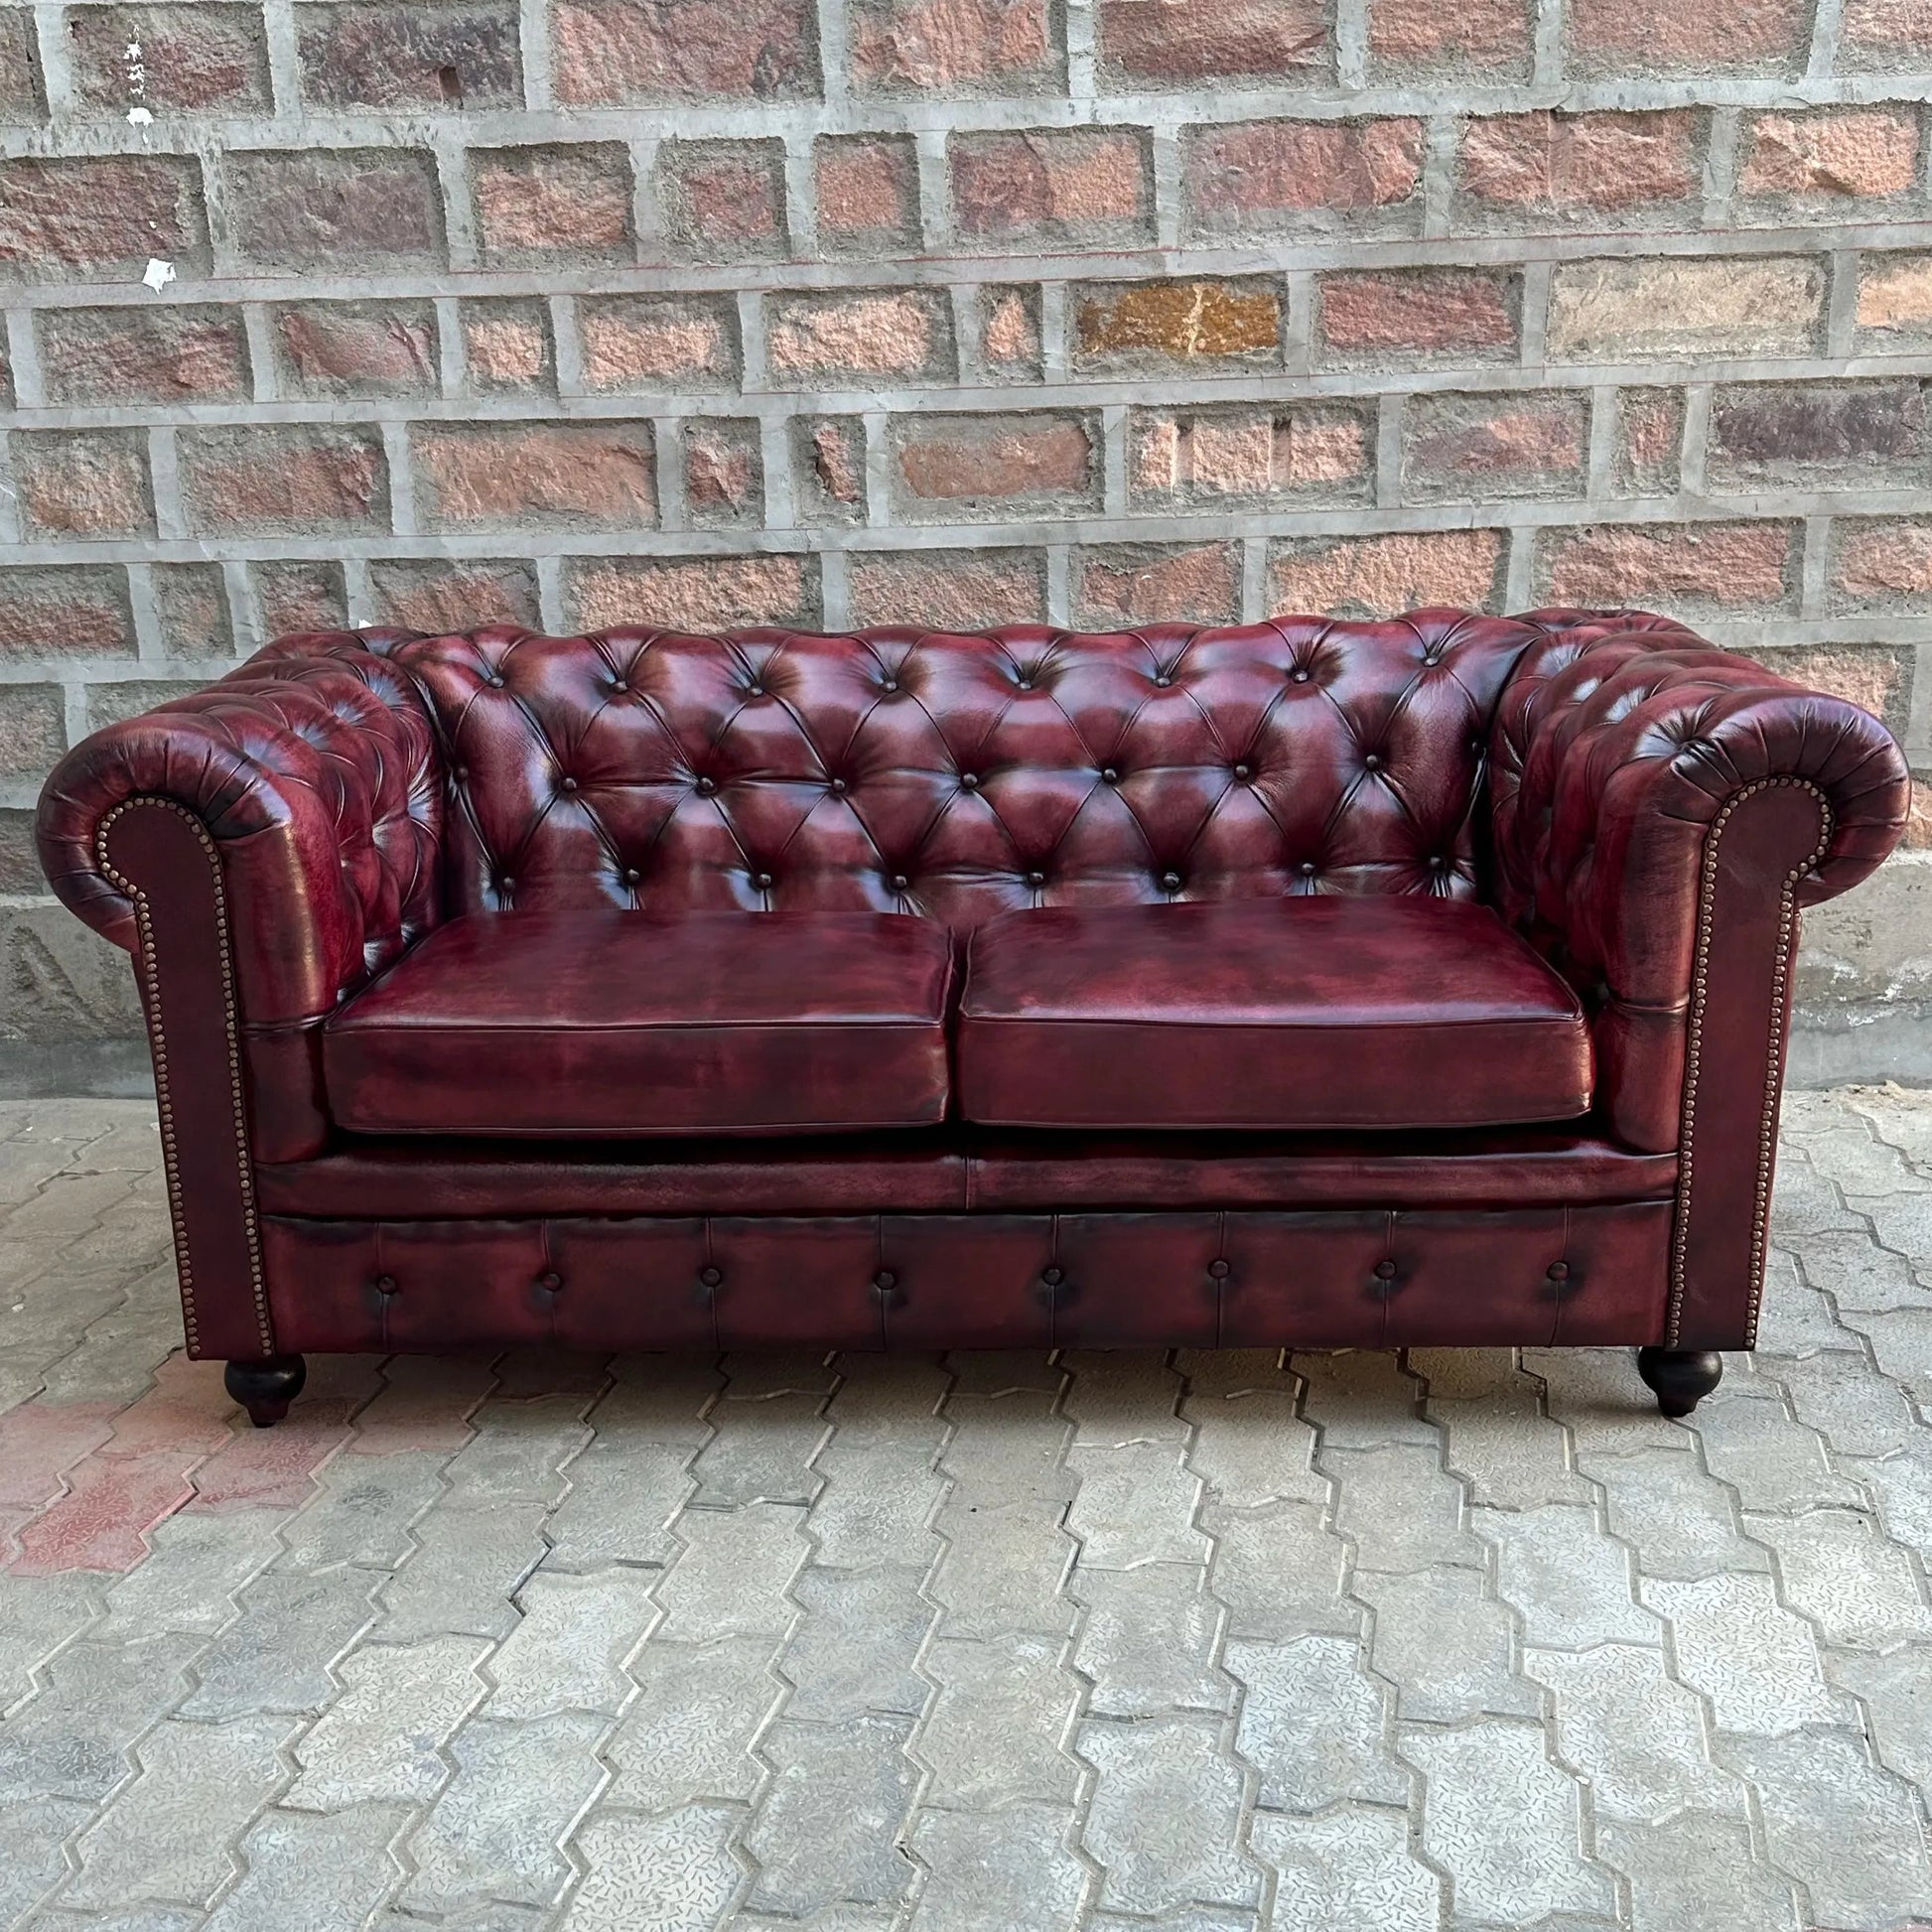 71" Loveseat Normal Cushions | Oxford Red Chesterfield Leather Loveseat with Normal Cushions (OR-2C) by Rising Tide Design Co.